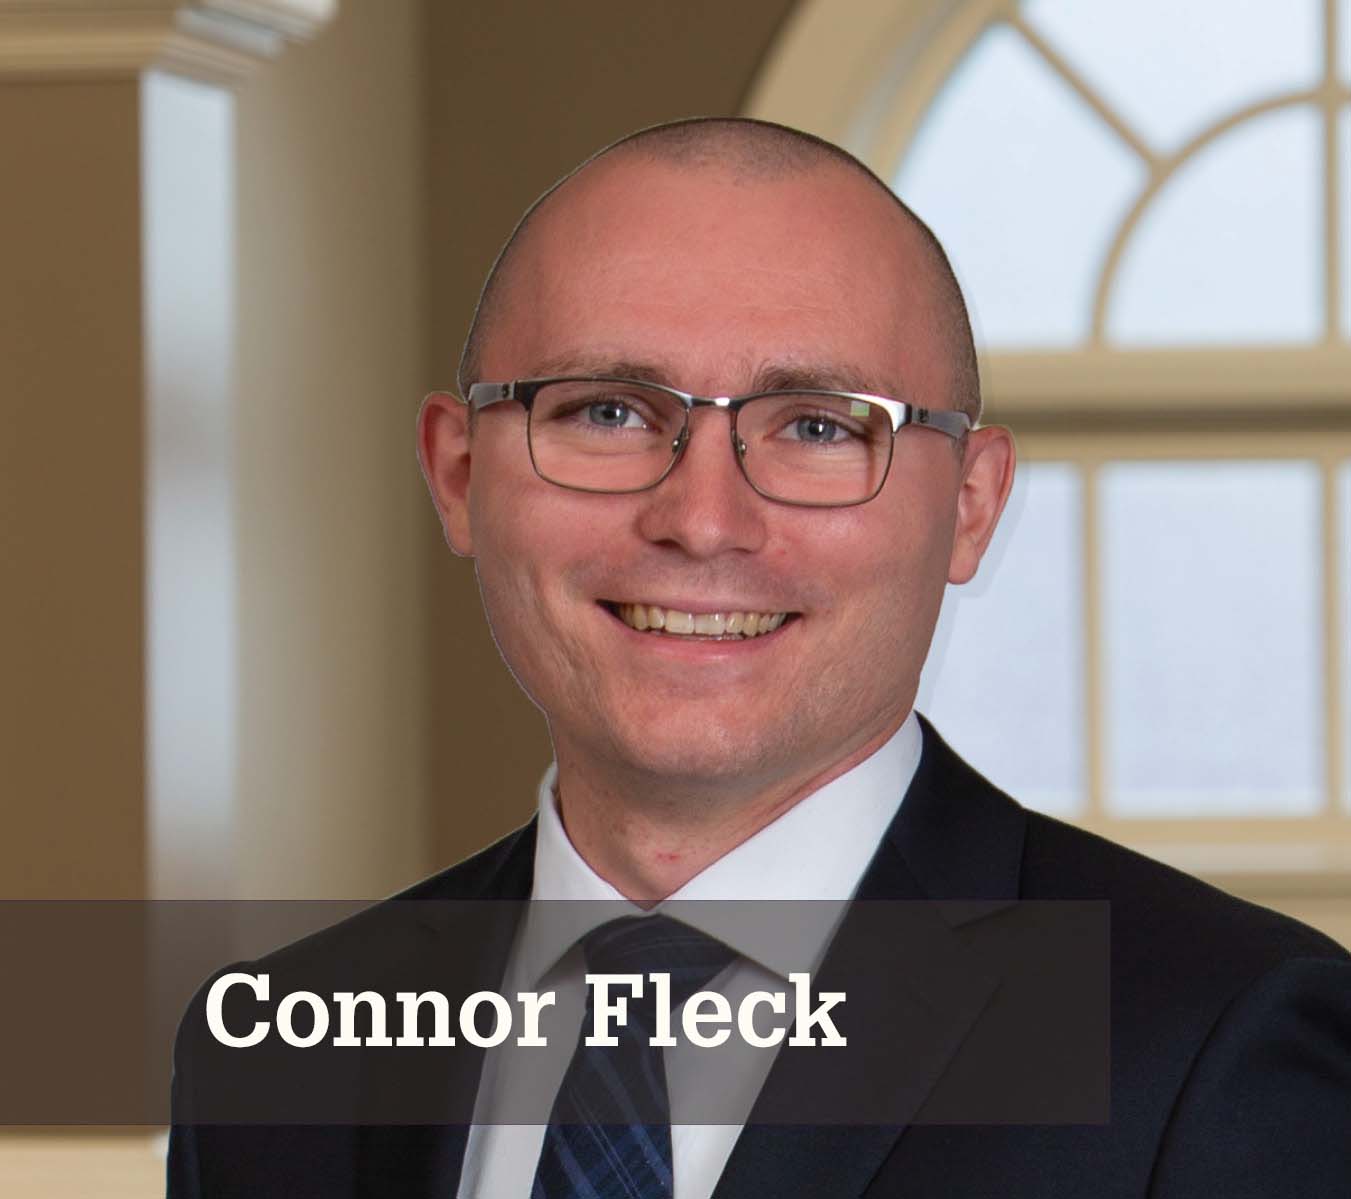 Image of Connor Fleck